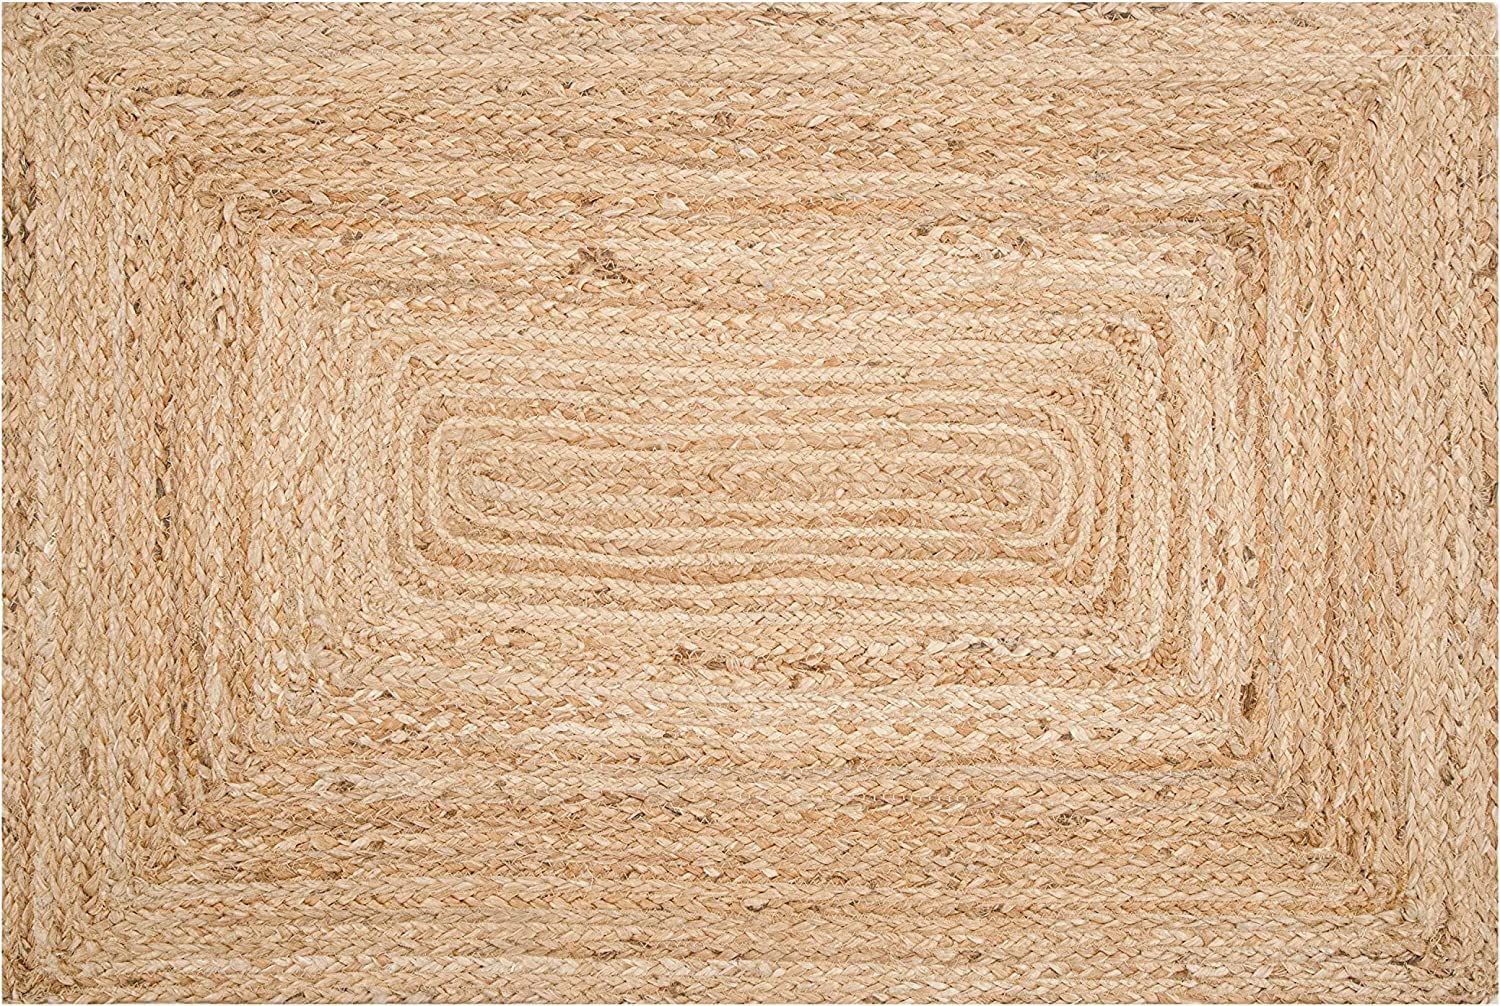 Jute Braid Natural Rug 2X3' -Natural Linen Color, Hand Woven & Reversible for Living Room Kitchen... | Amazon (US)